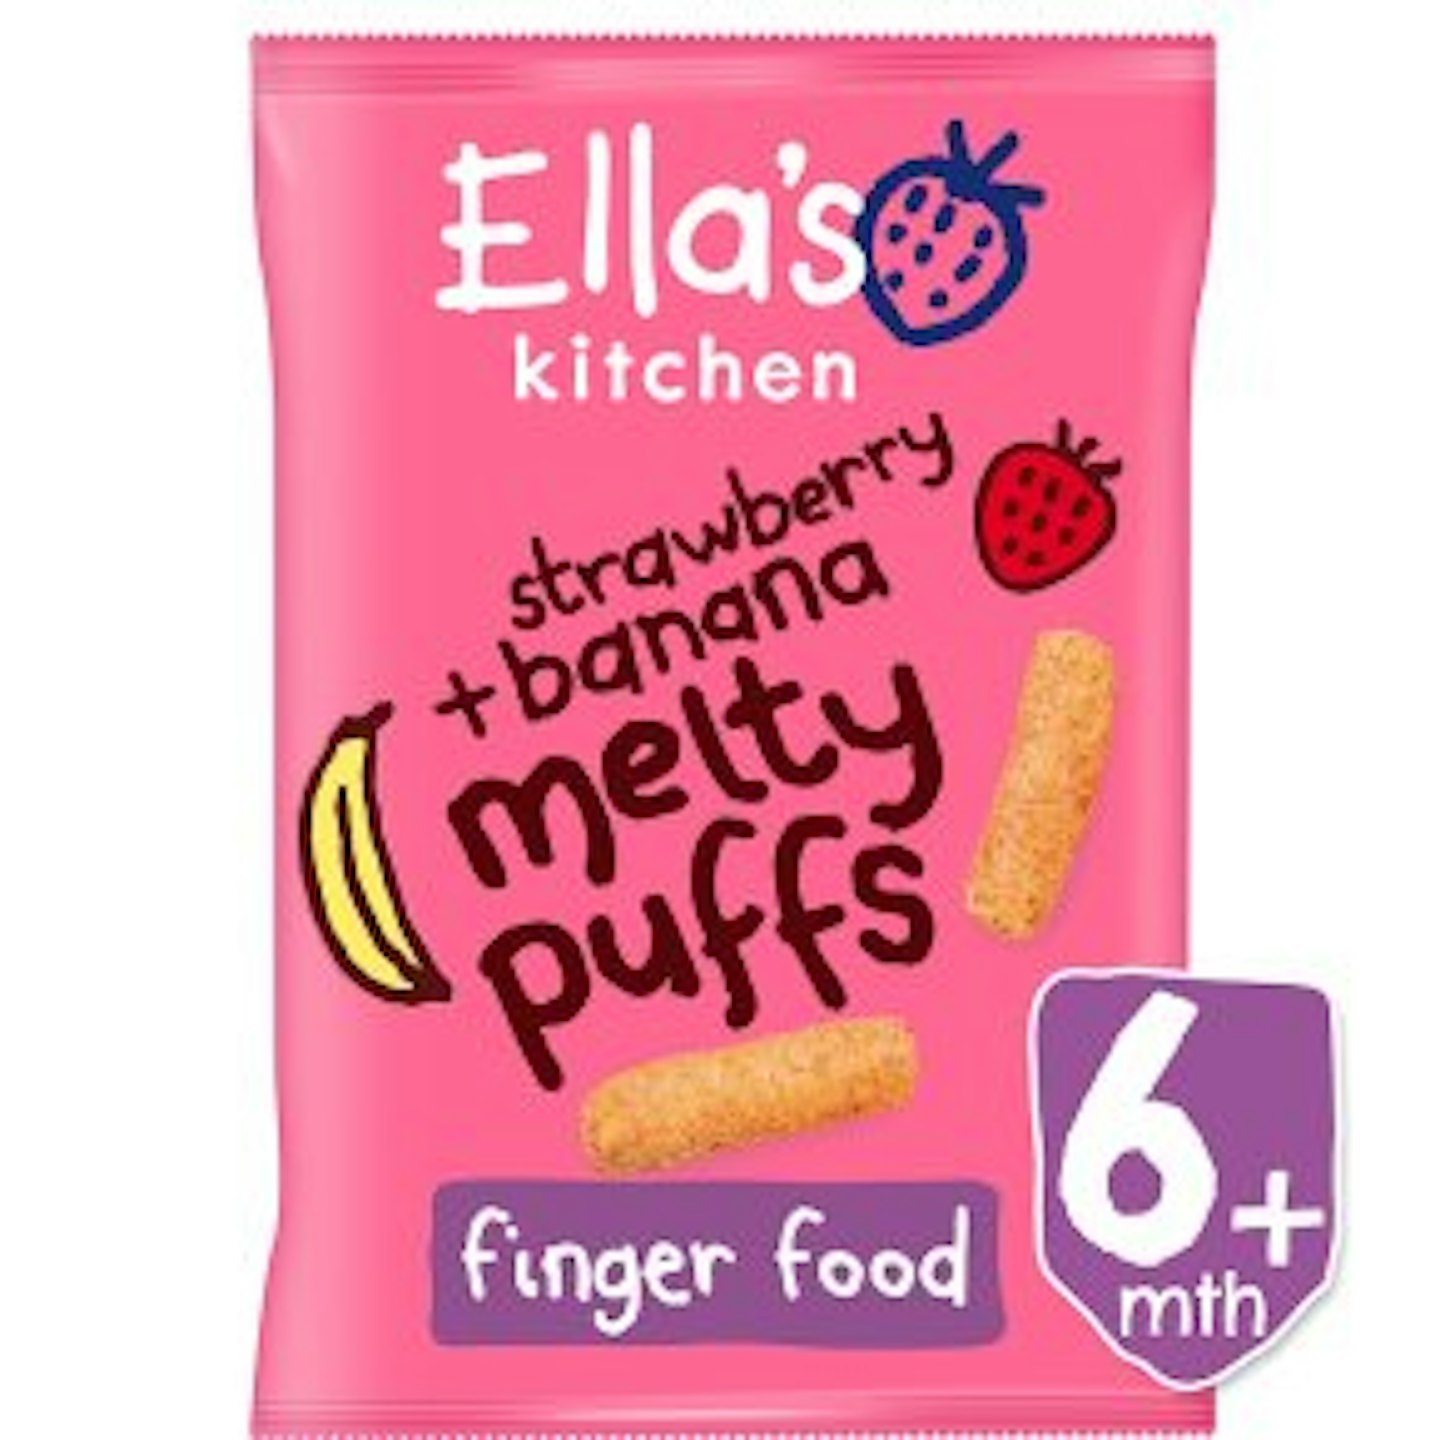 Ella's Kitchen Melty Puffs, 79p, available from Waitrose 